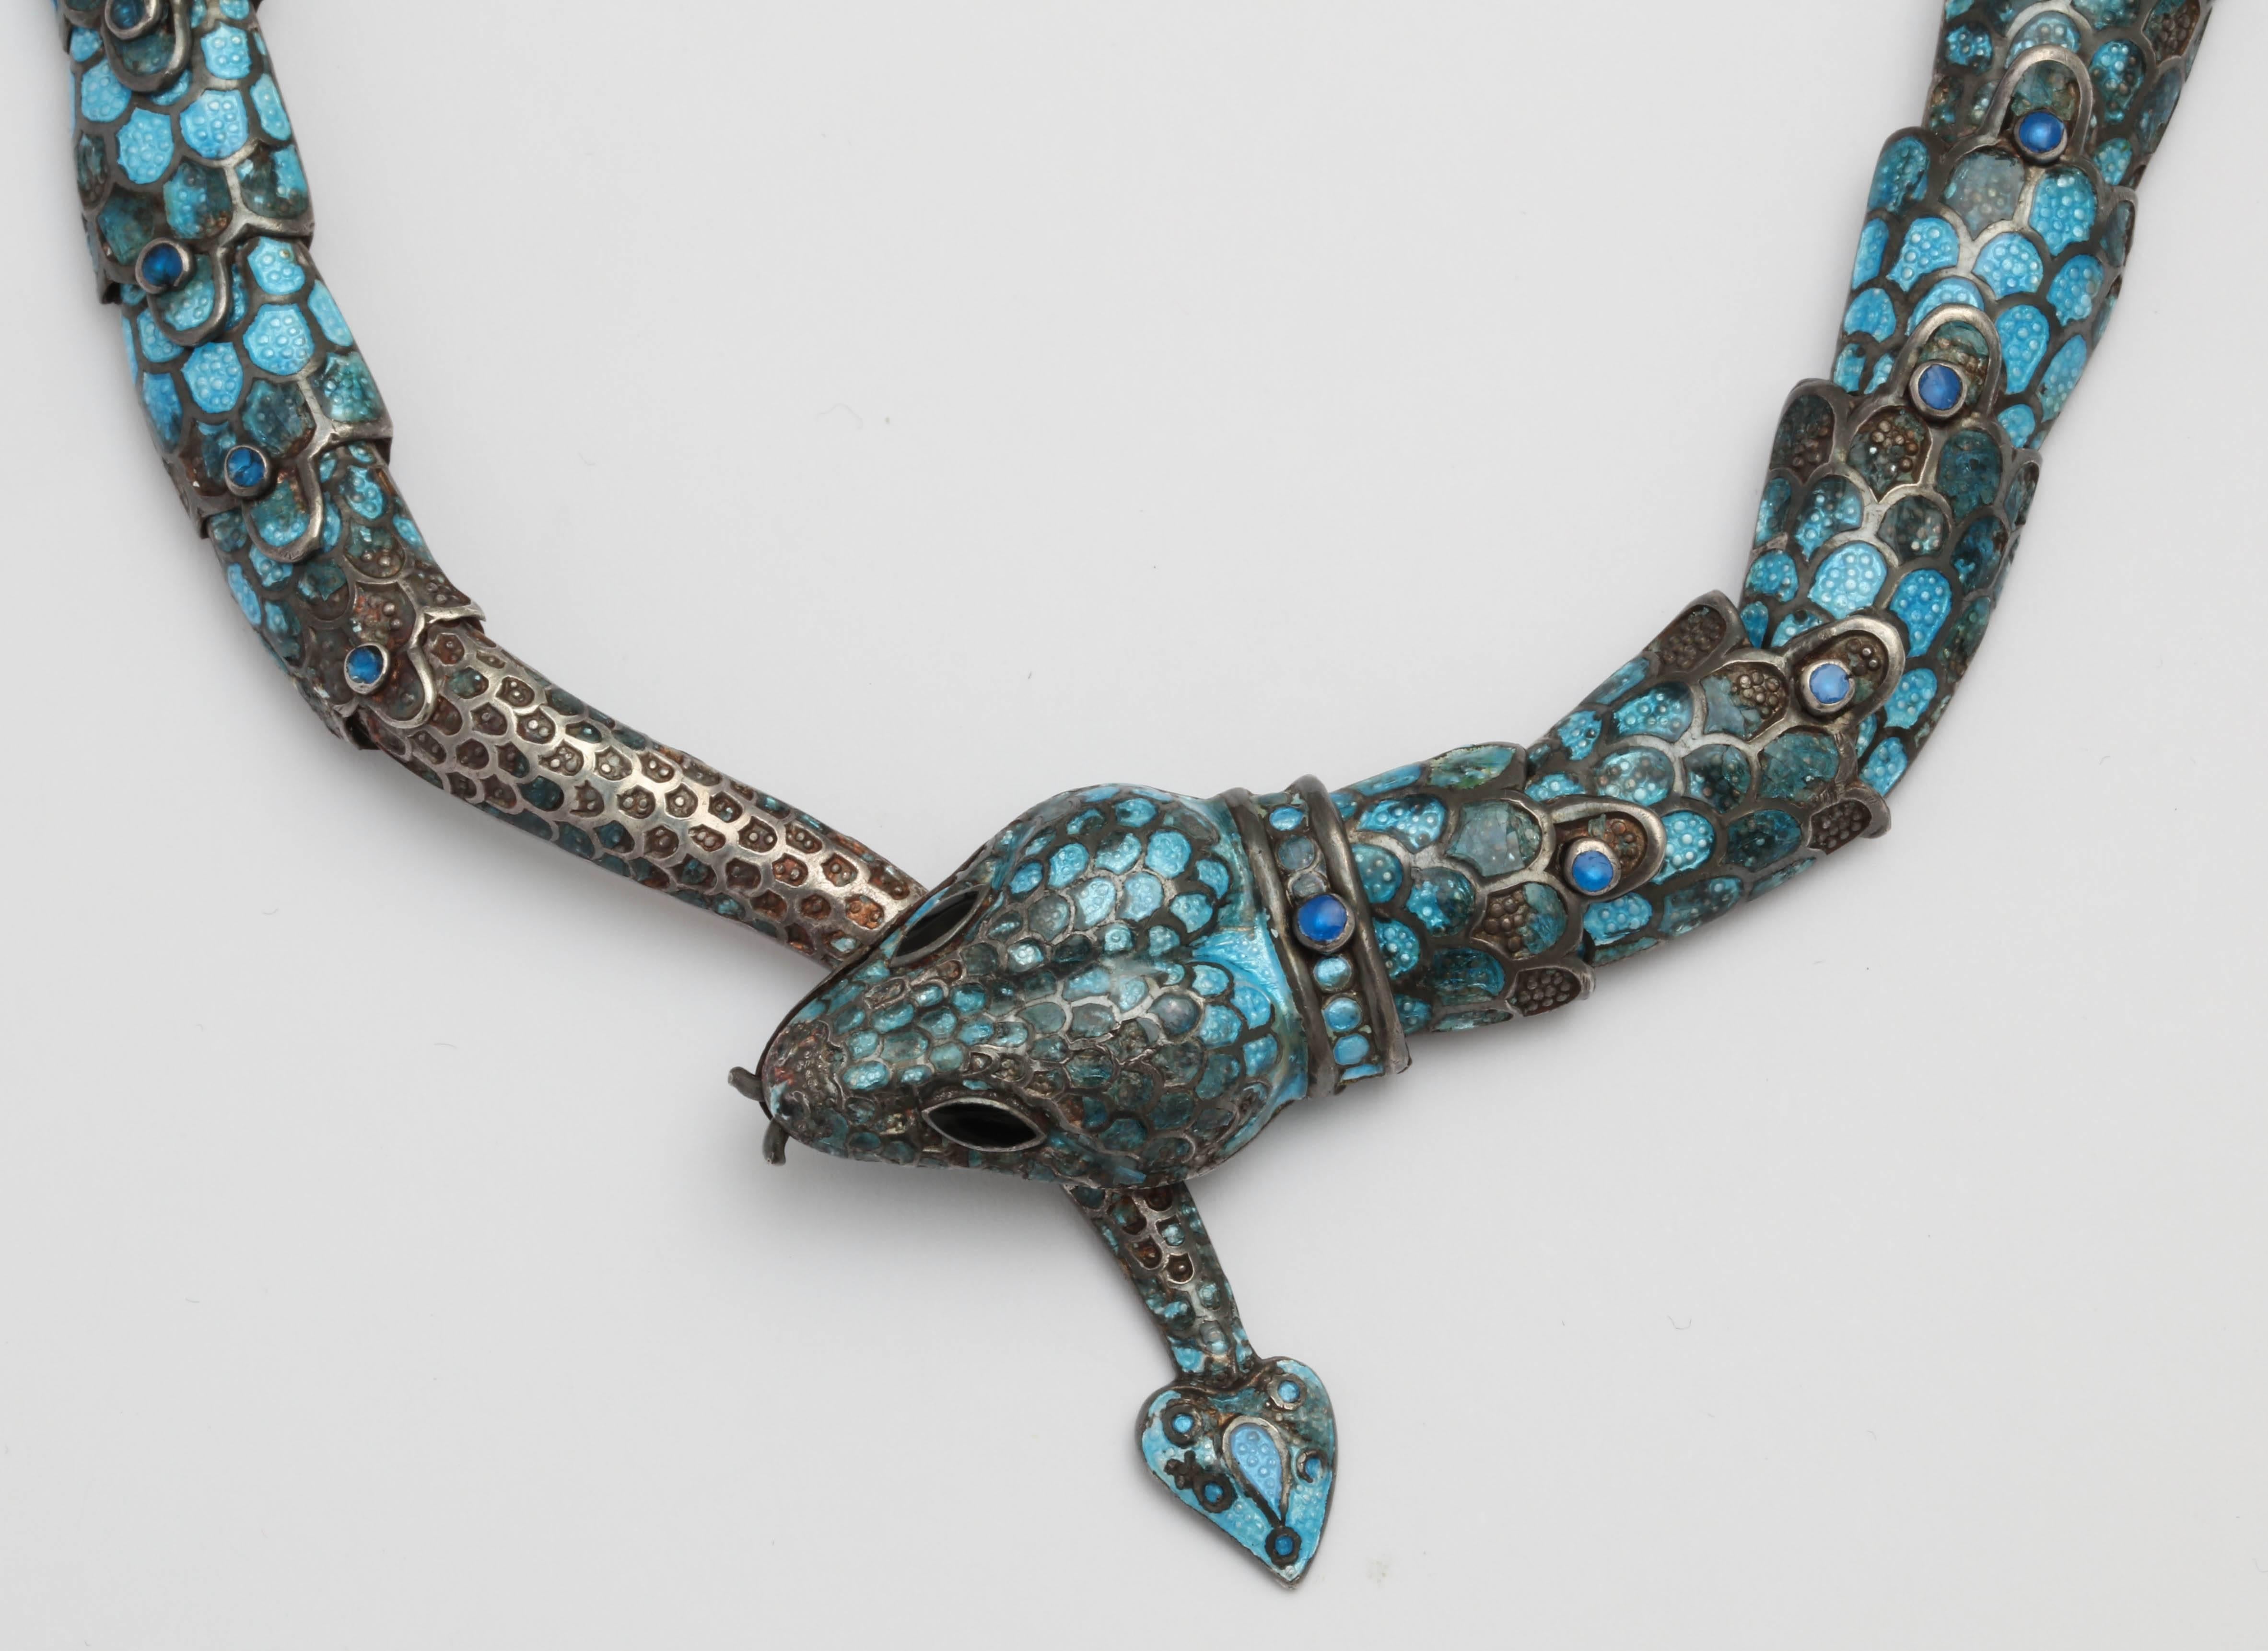 Margot of Taxco - Margot van Voorhies Carr - Magnificent reticulated Serpent in Turquoise Blue enamel with accented raised enamel joints  Early mark - Late 40-s.  Very exotic and hearkening an earlier age when Mexico was for the truly adventurous. 